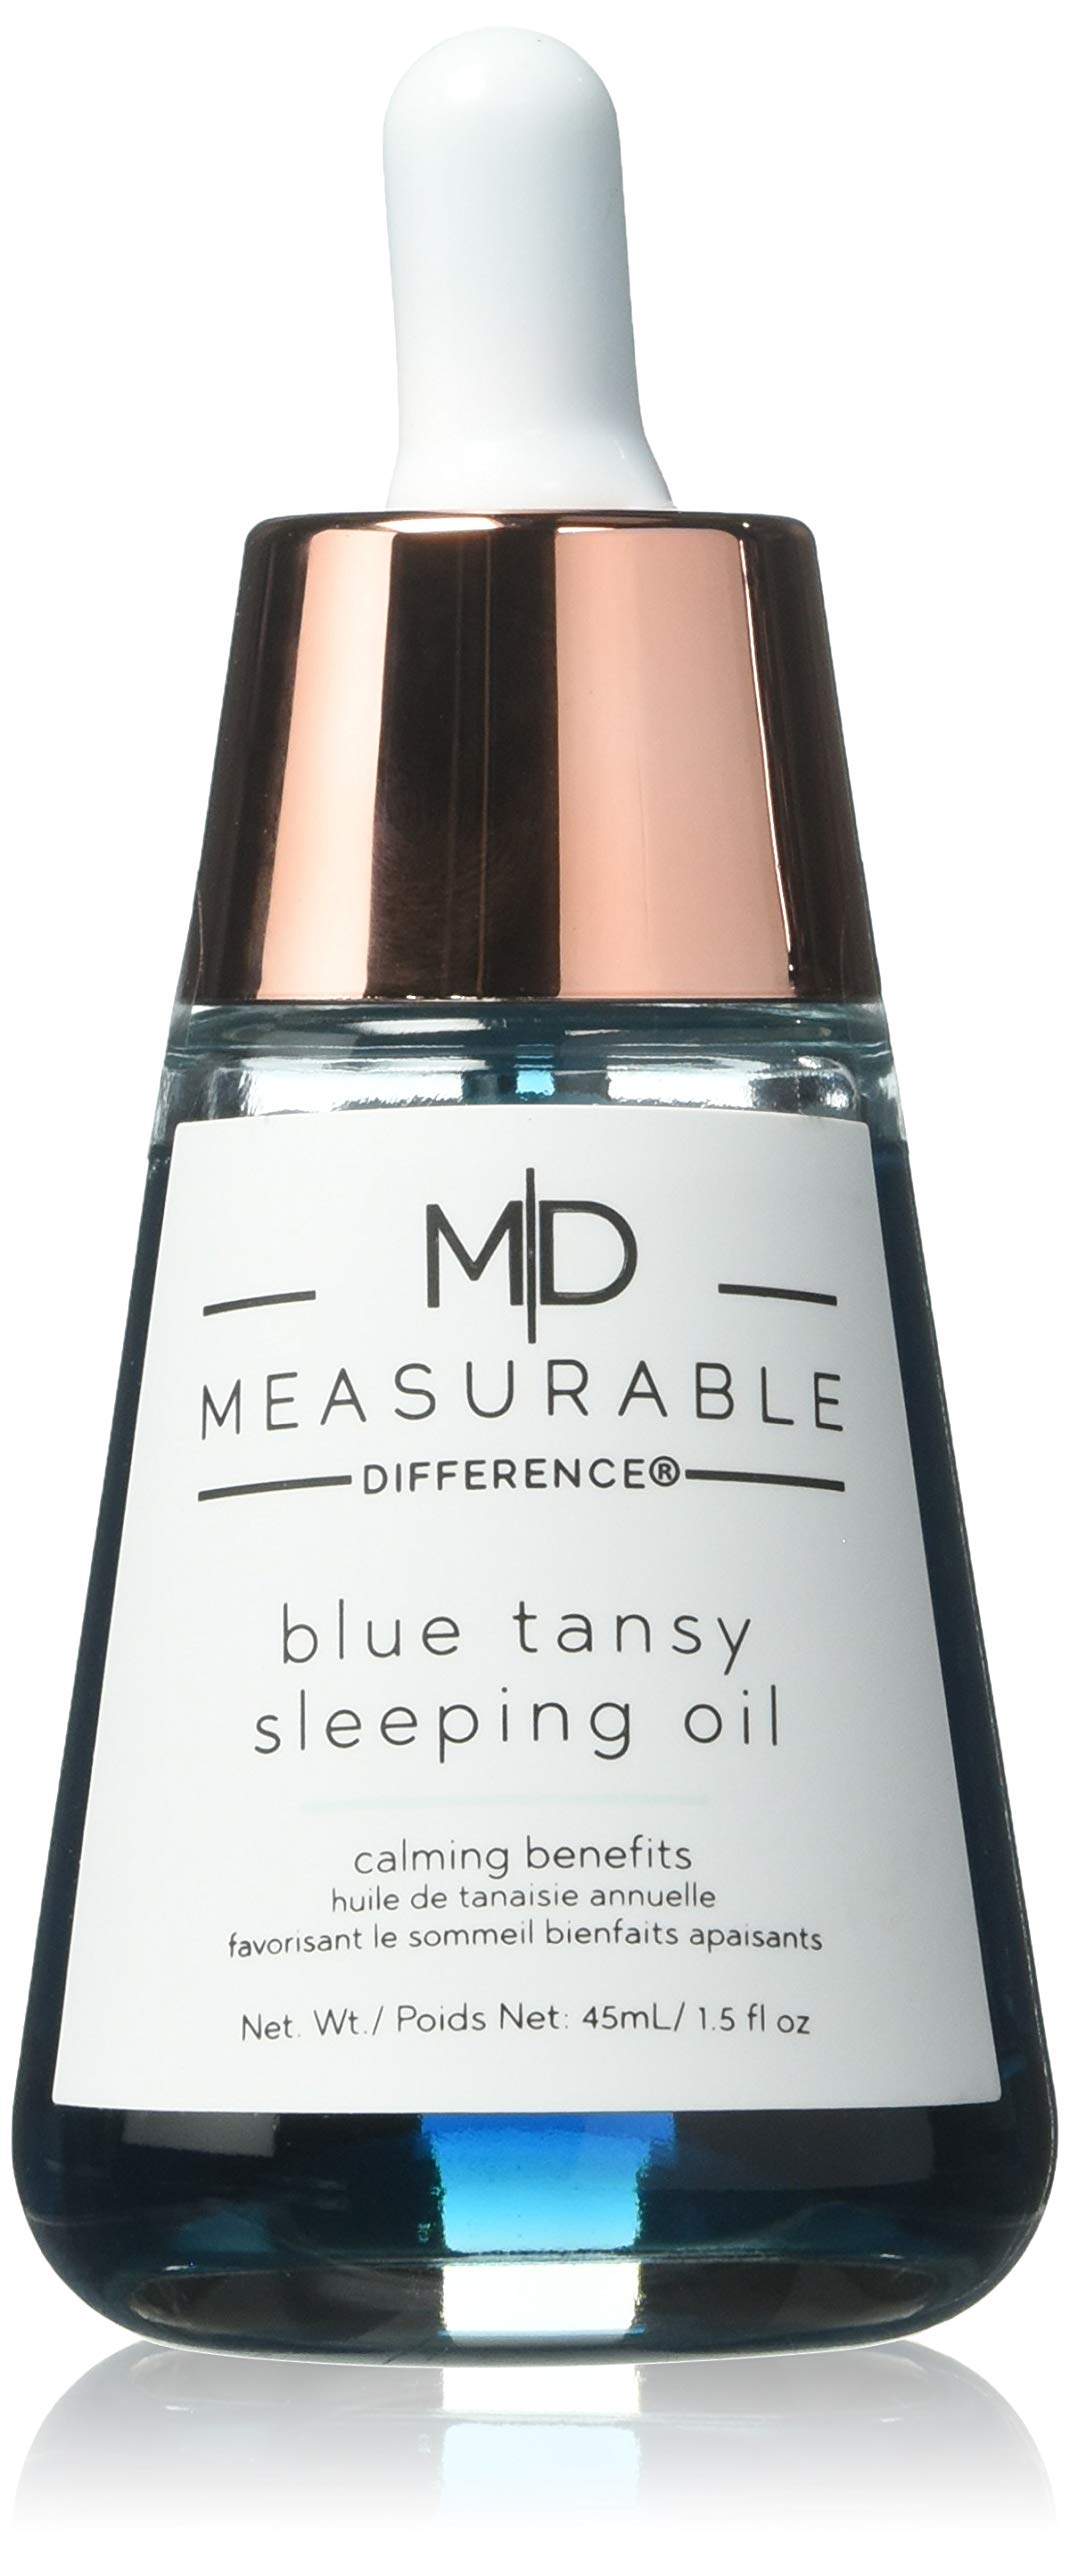 Measurable Difference Sleeping Oils, Blue Tansy, 0.33 Pound